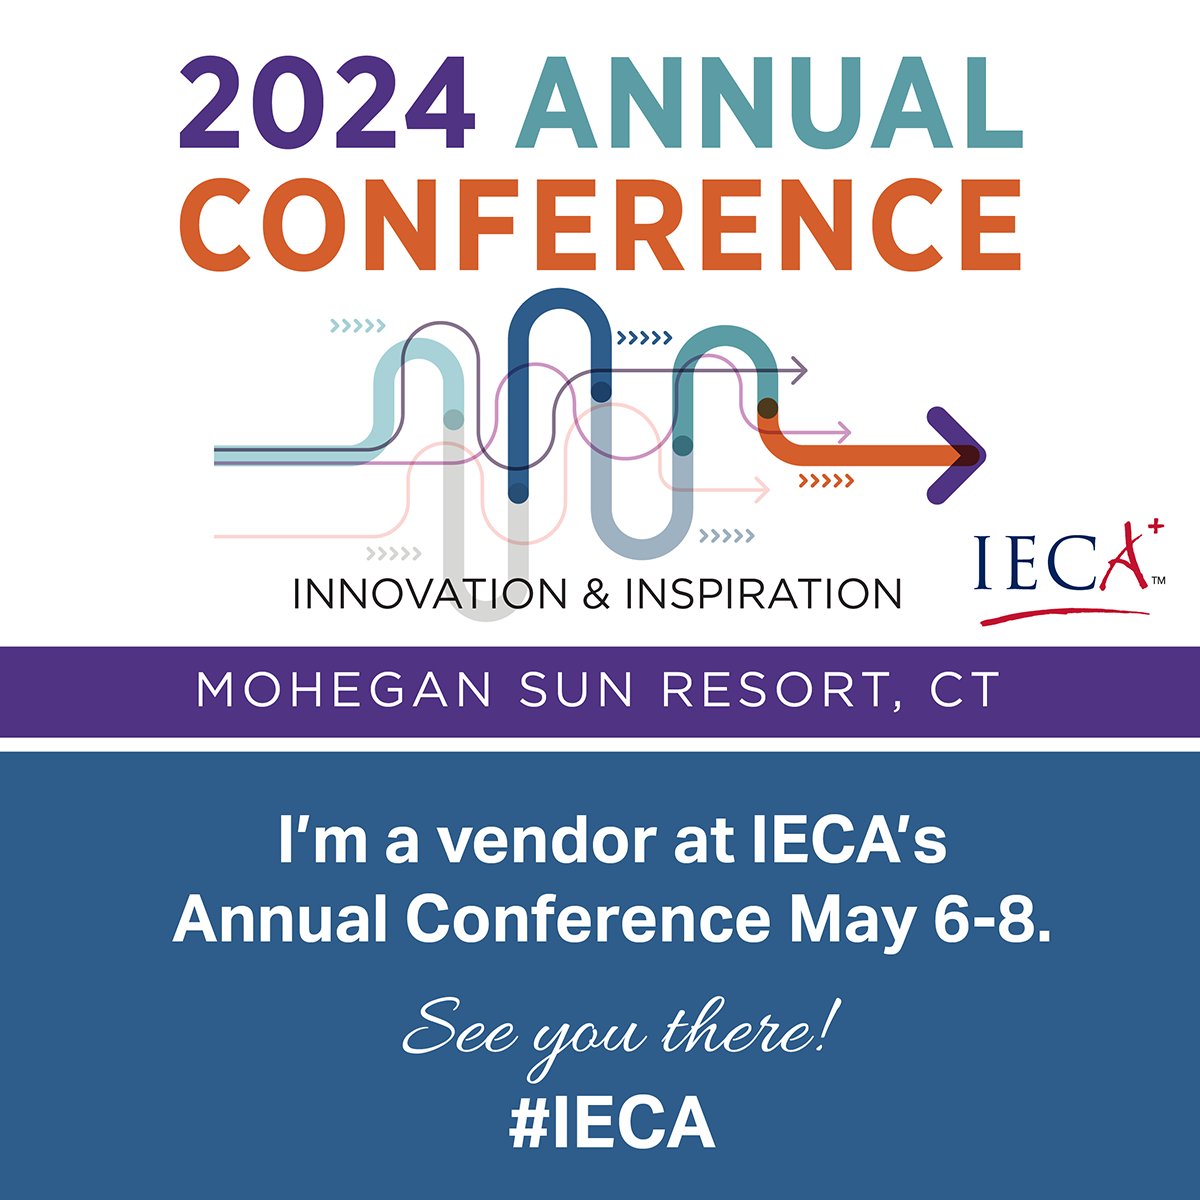 Are you at #IECA 2024 in CT? Don't forget to swing by our booth! Let's chat about how we're shaping the future of education together. 

#IEC #CollegeCounseling #EducationalConsulting